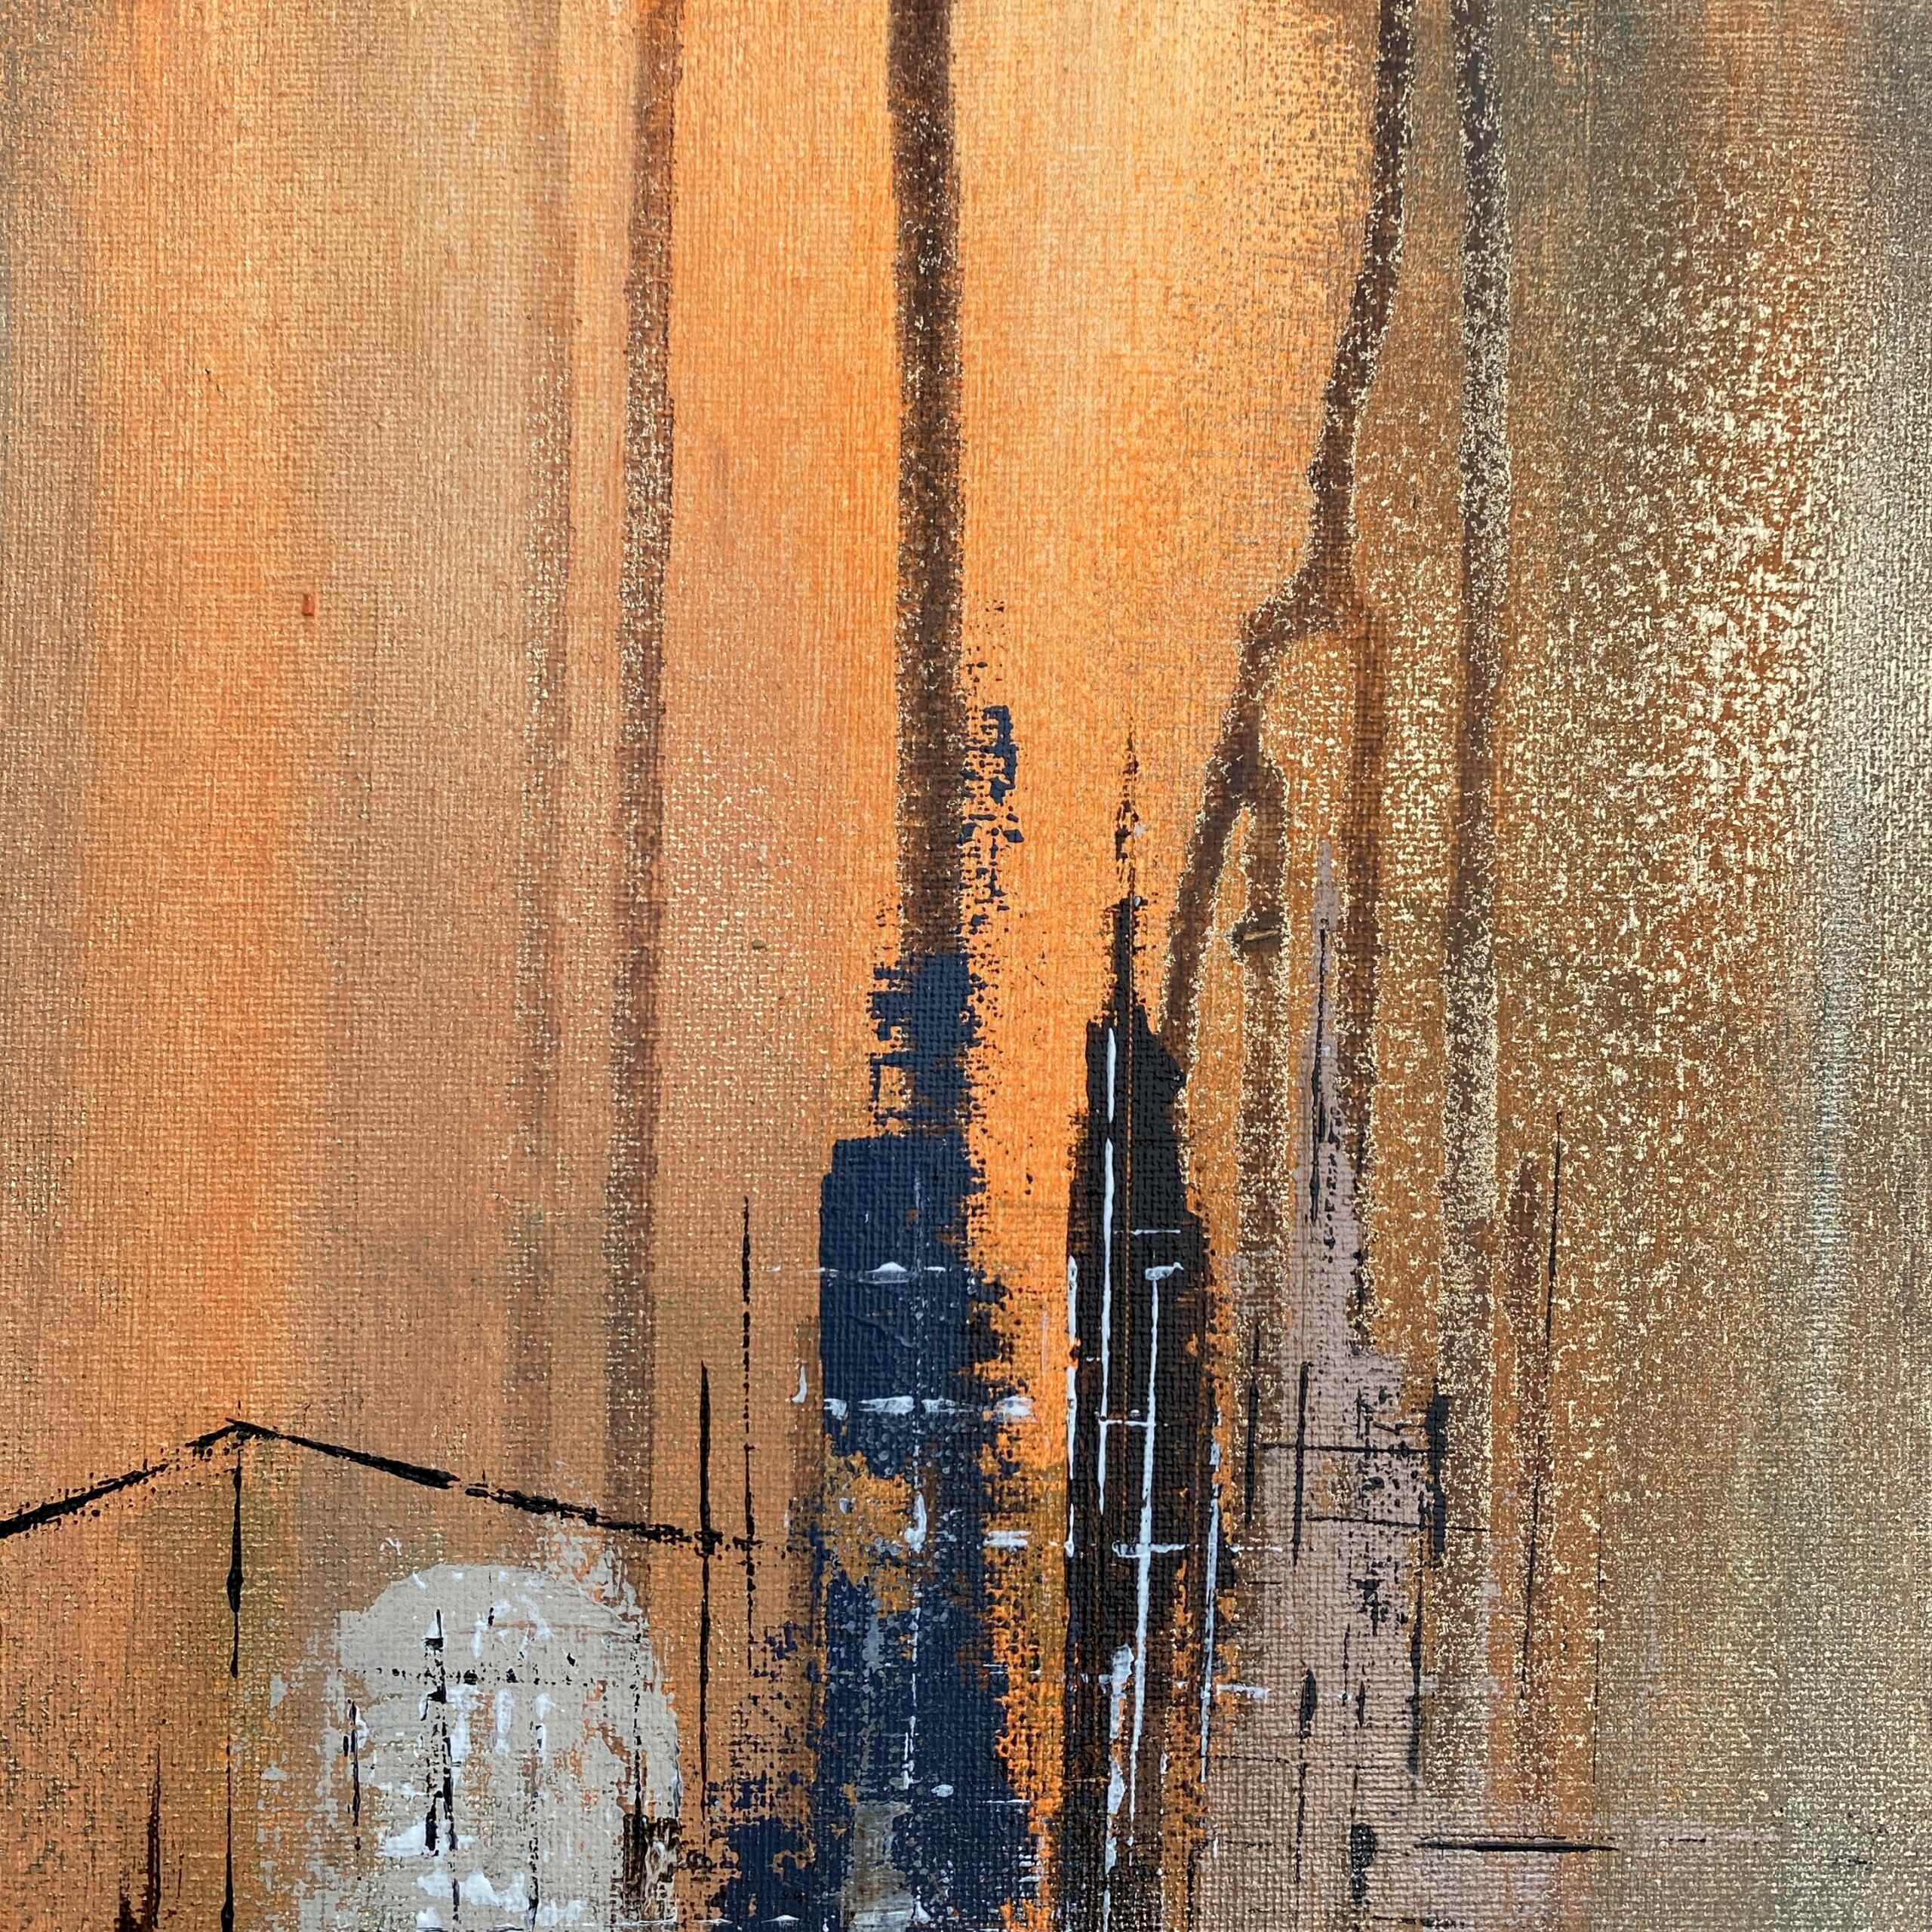 Detail of artwork "Lights of the City No 1" by Nina Groth